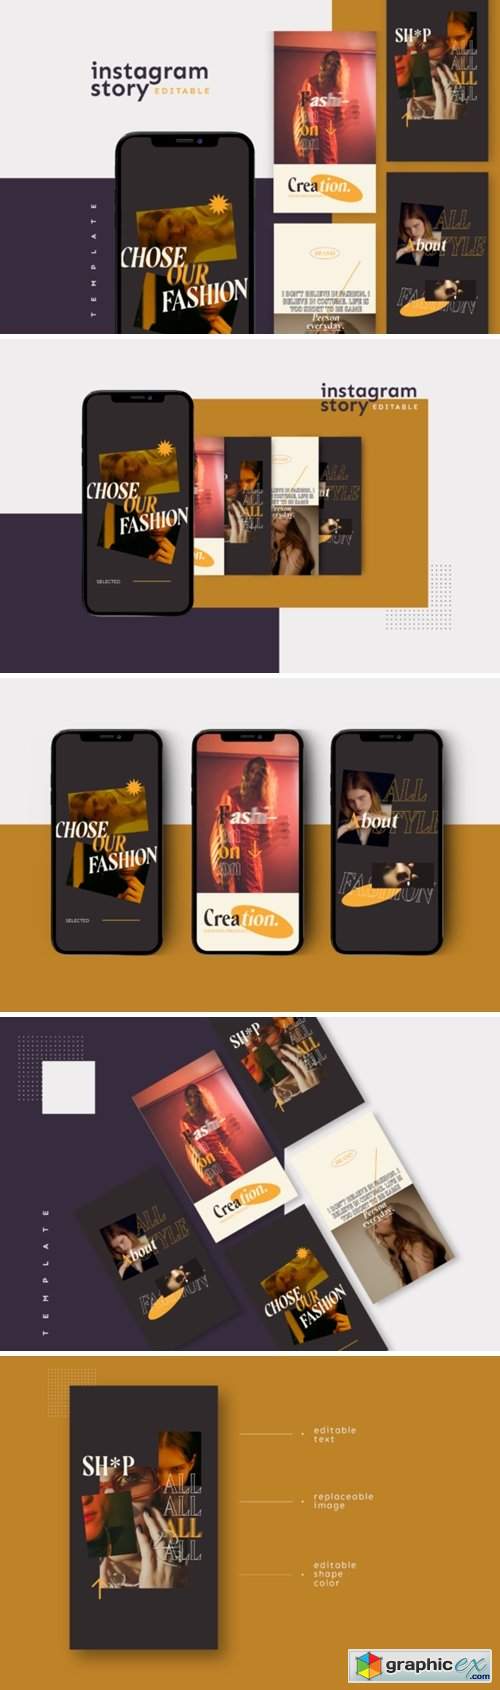  Instagram Story Template 2654462 